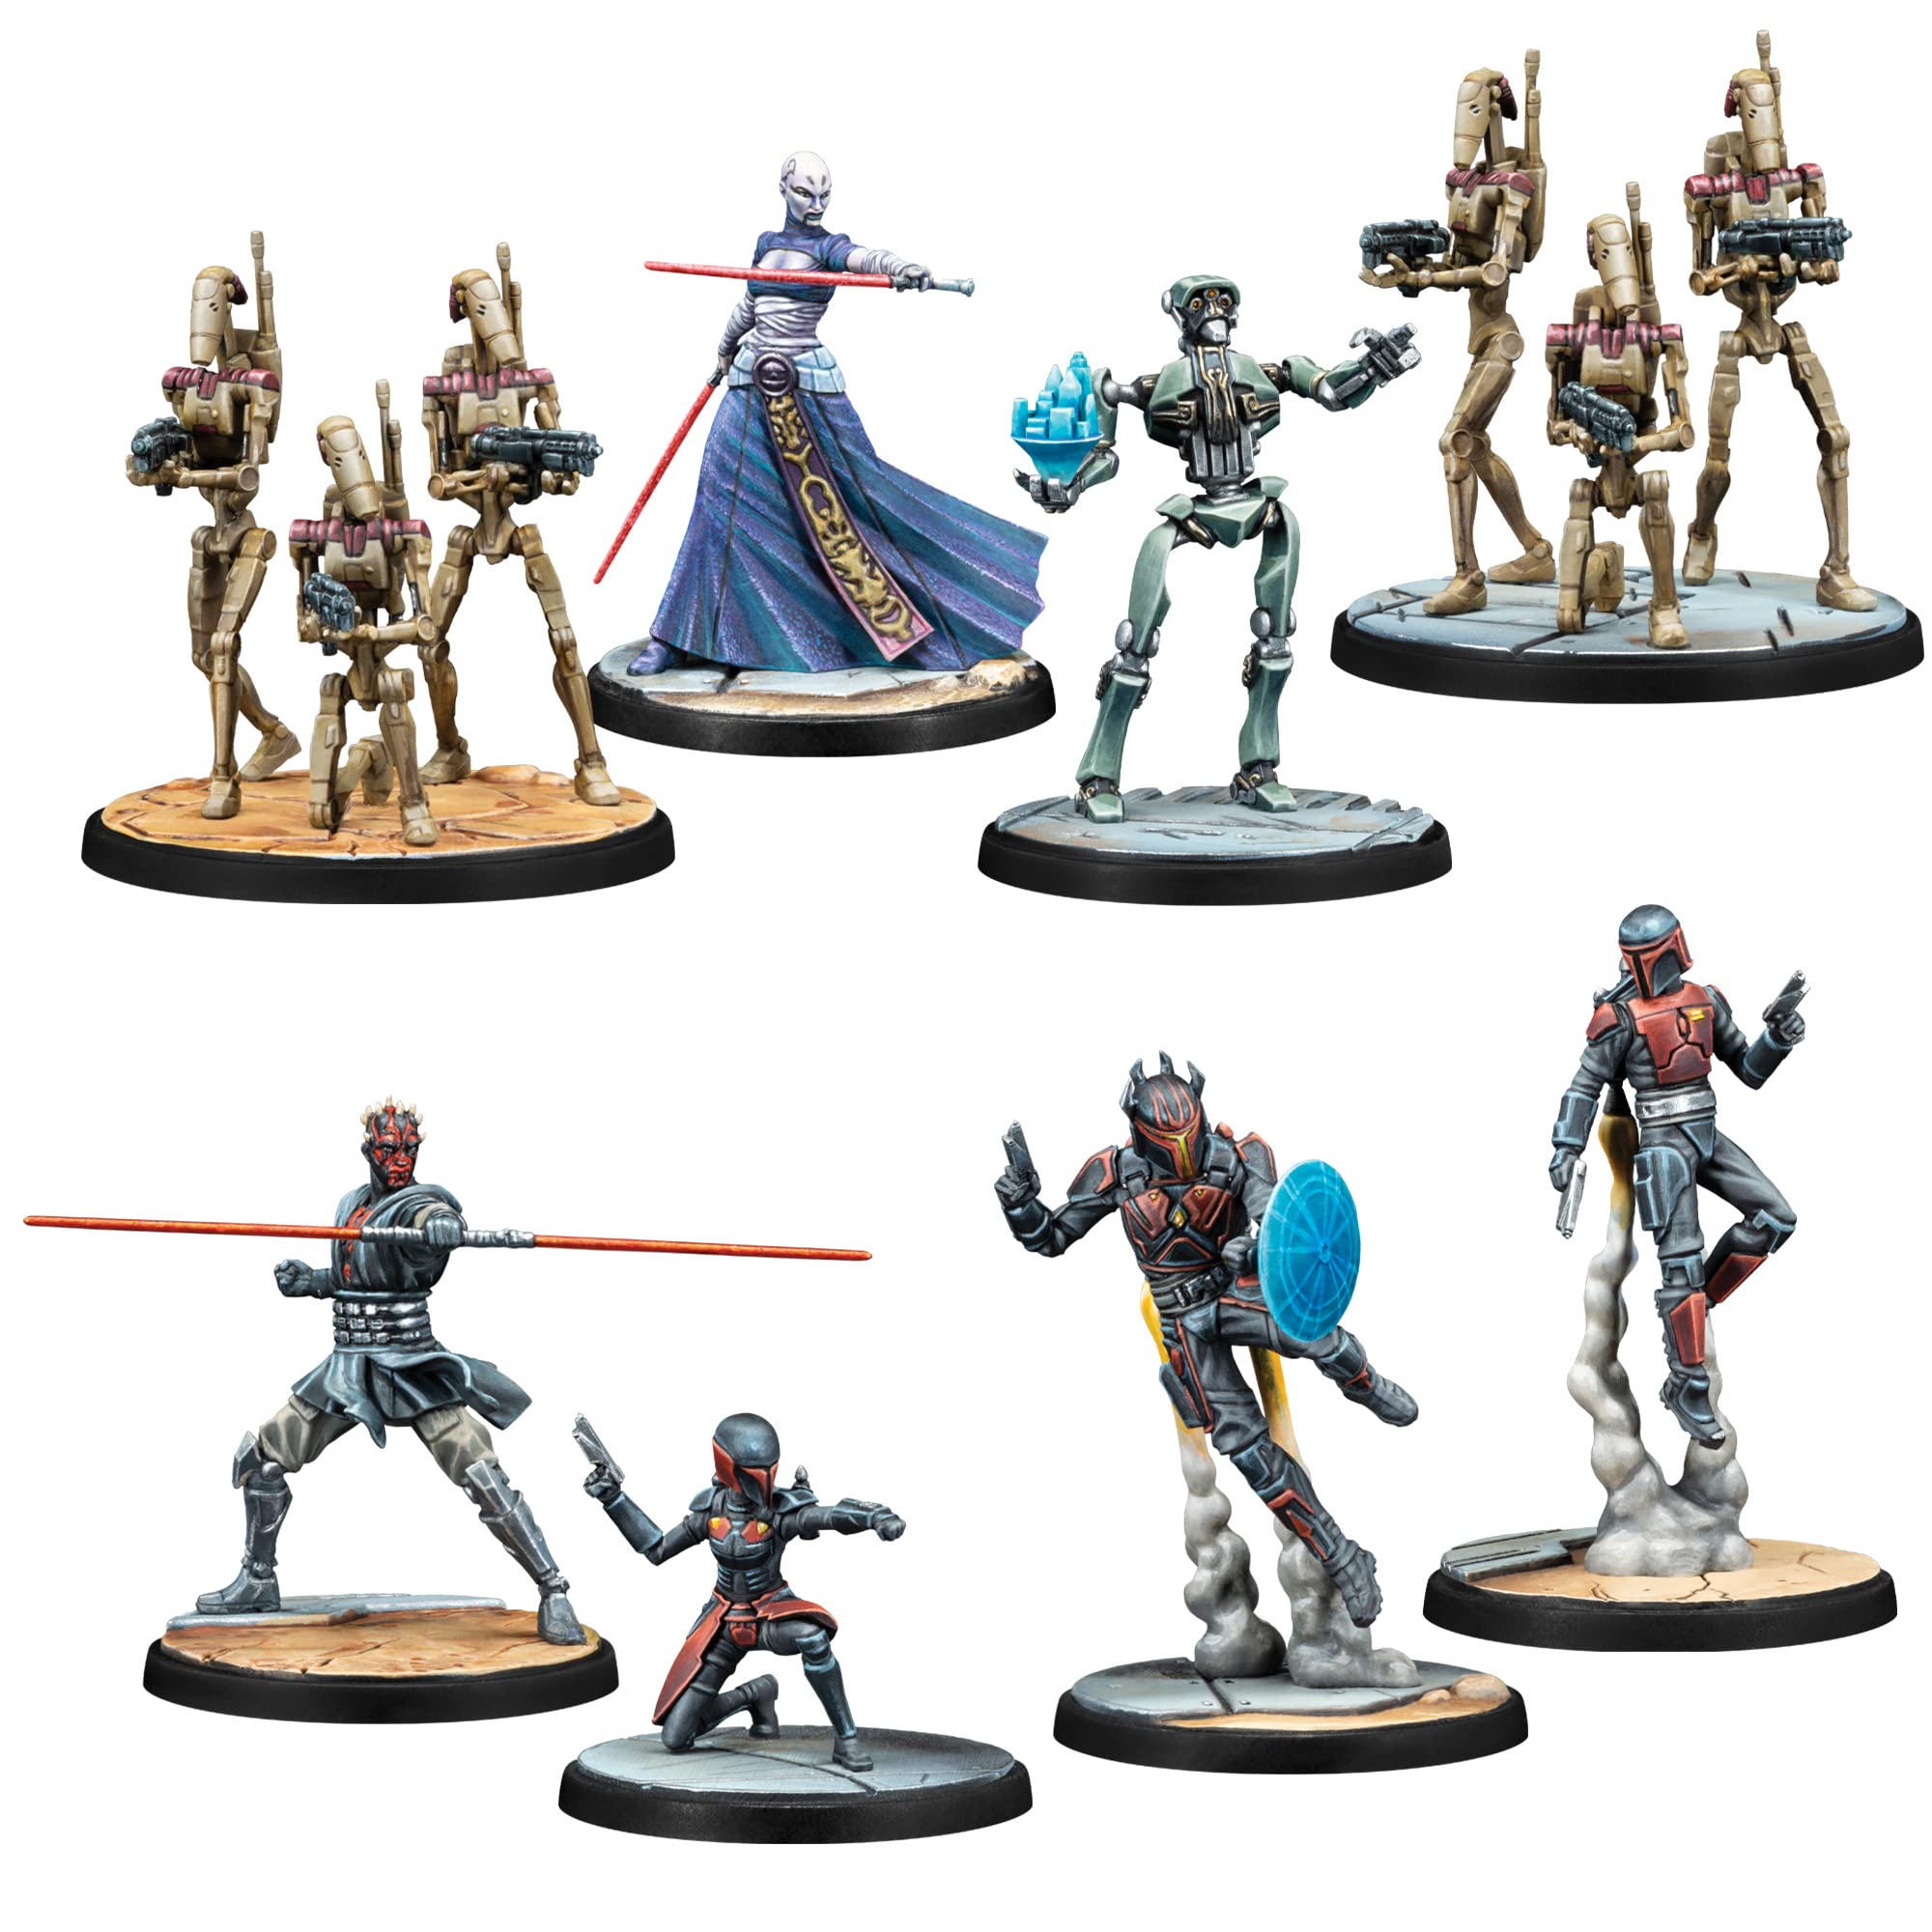 Star Wars Shatterpoint Core Set - Tabletop Miniatures Game, Strategy Game, Skirmish Battle Game for Kids and Adults, Ages 14+, 2 Players, 90 Min Playtime, Made by Atomic Mass Games